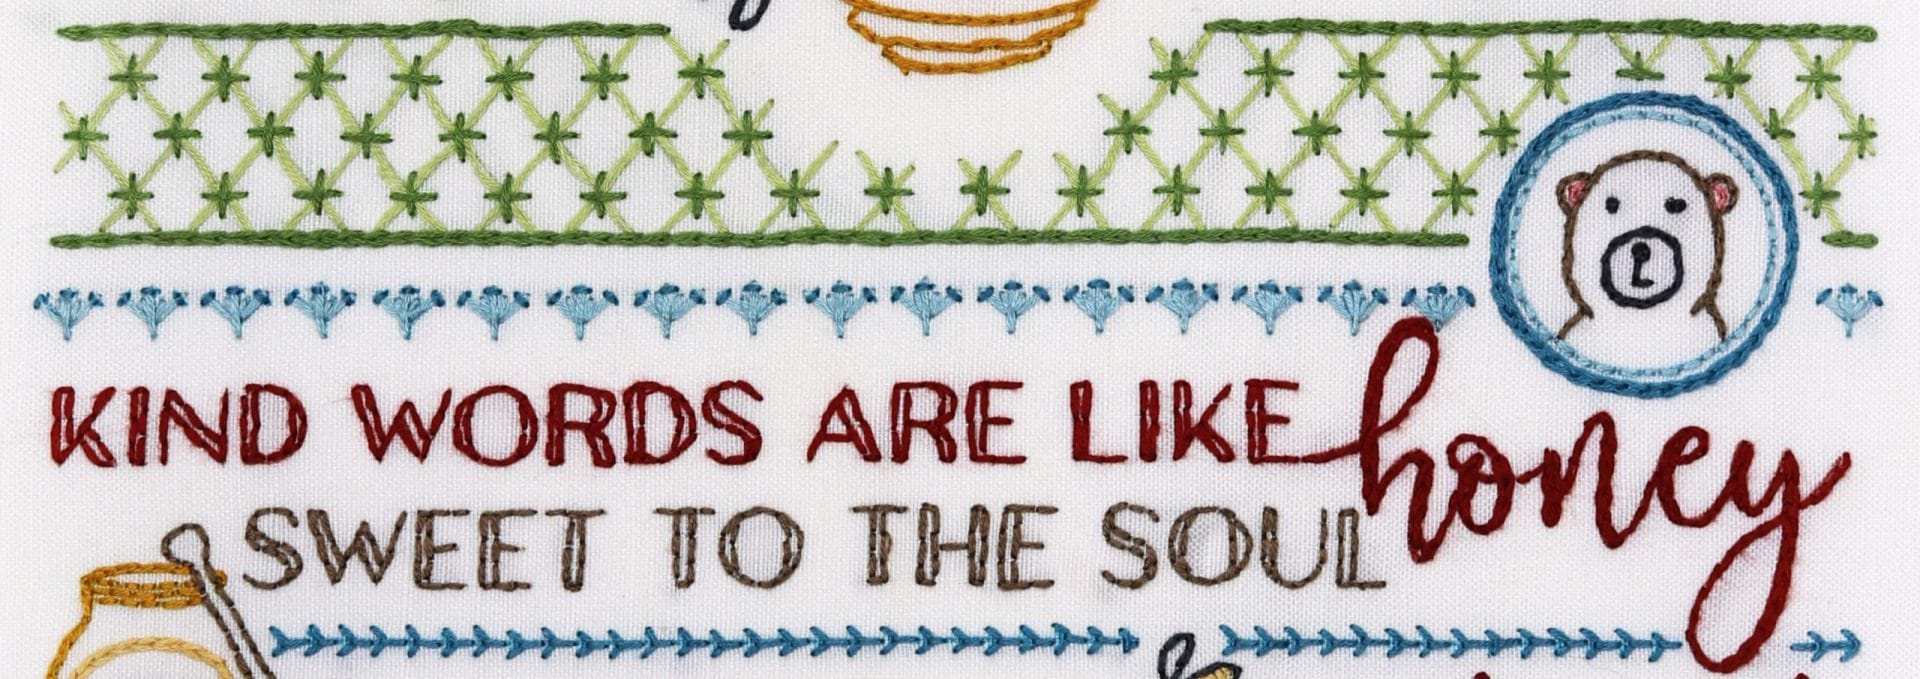 Embroidered detail from traditional embroidery stitch sampler with honeybee themes